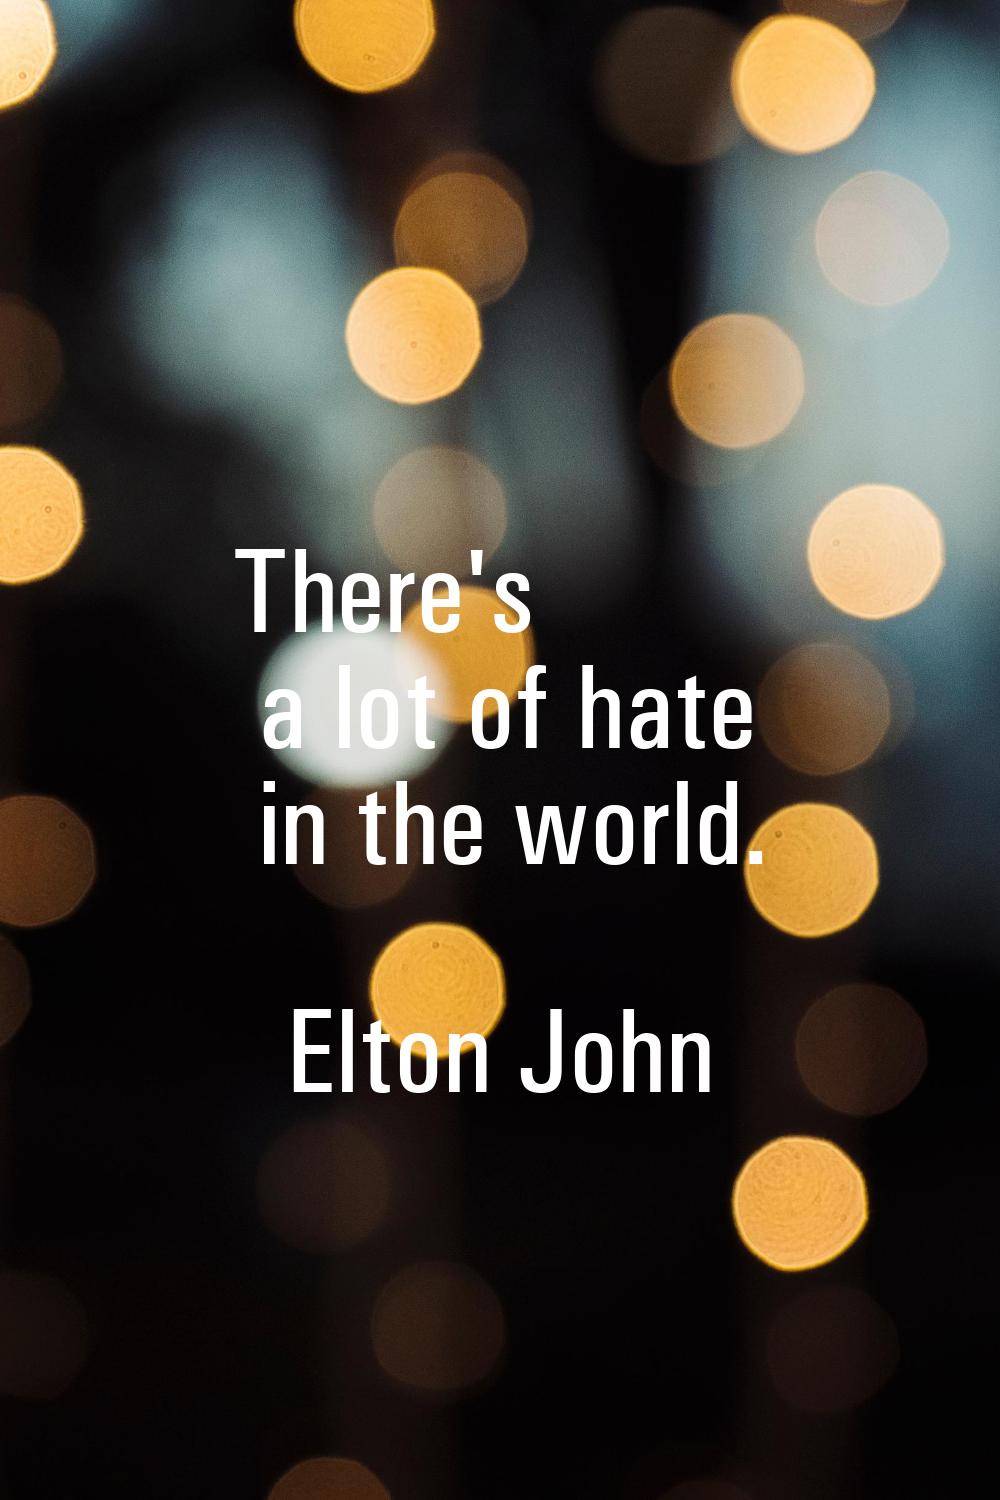 There's a lot of hate in the world.